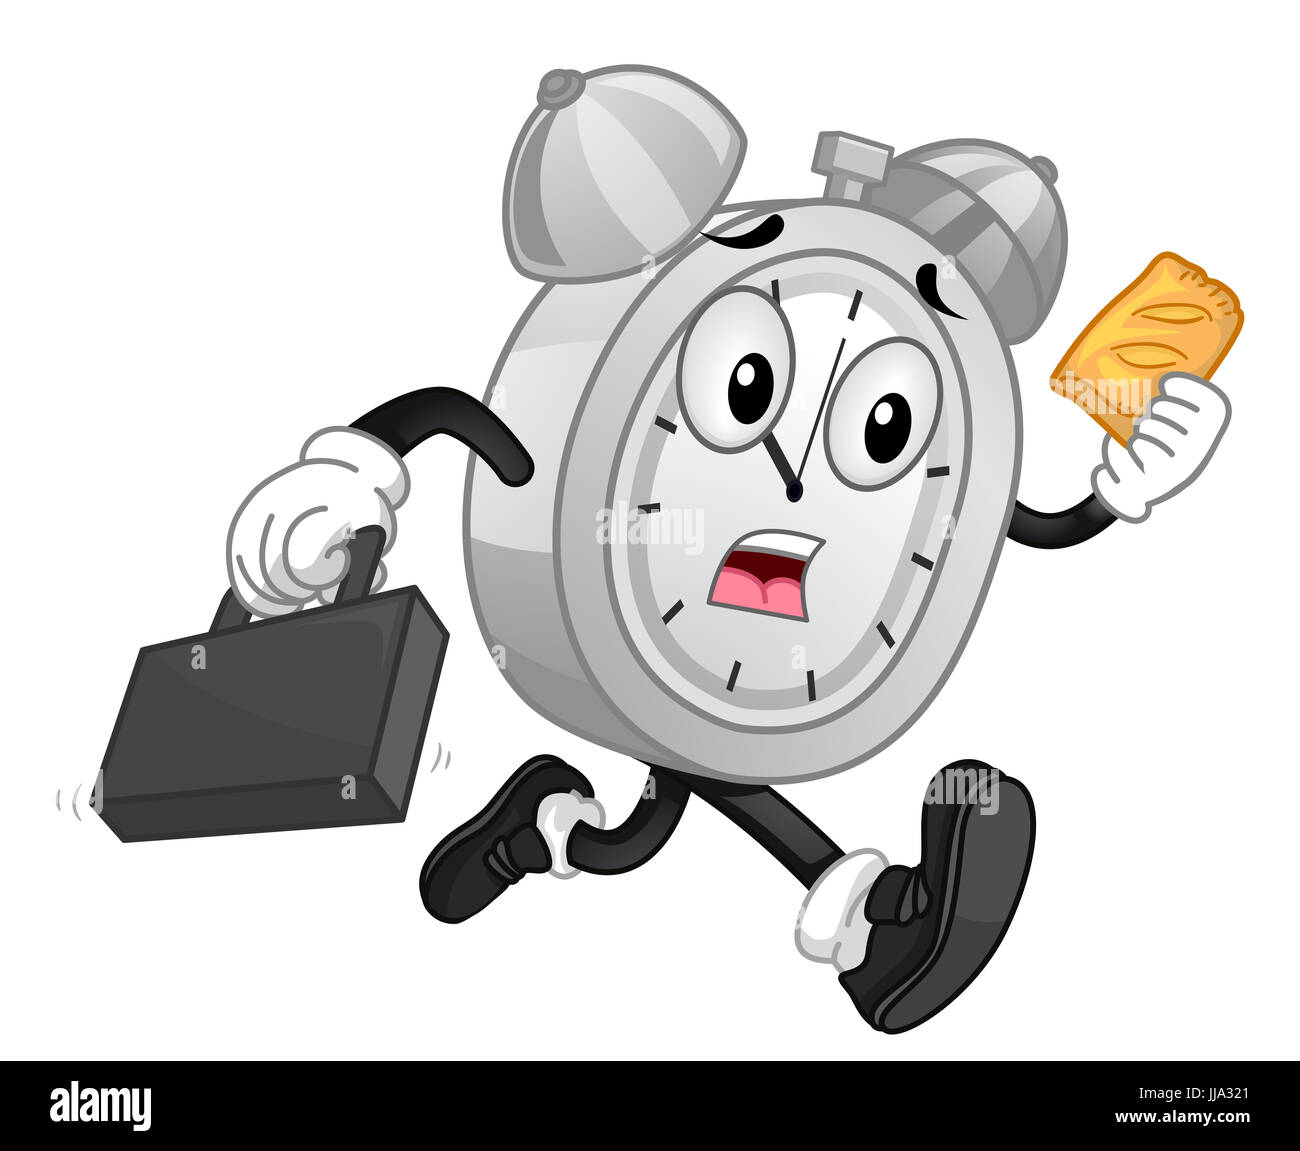 Mascot Illustration of a Panicking Analog Alarm Clock Eating a Piece of Pie While Running Stock Photo